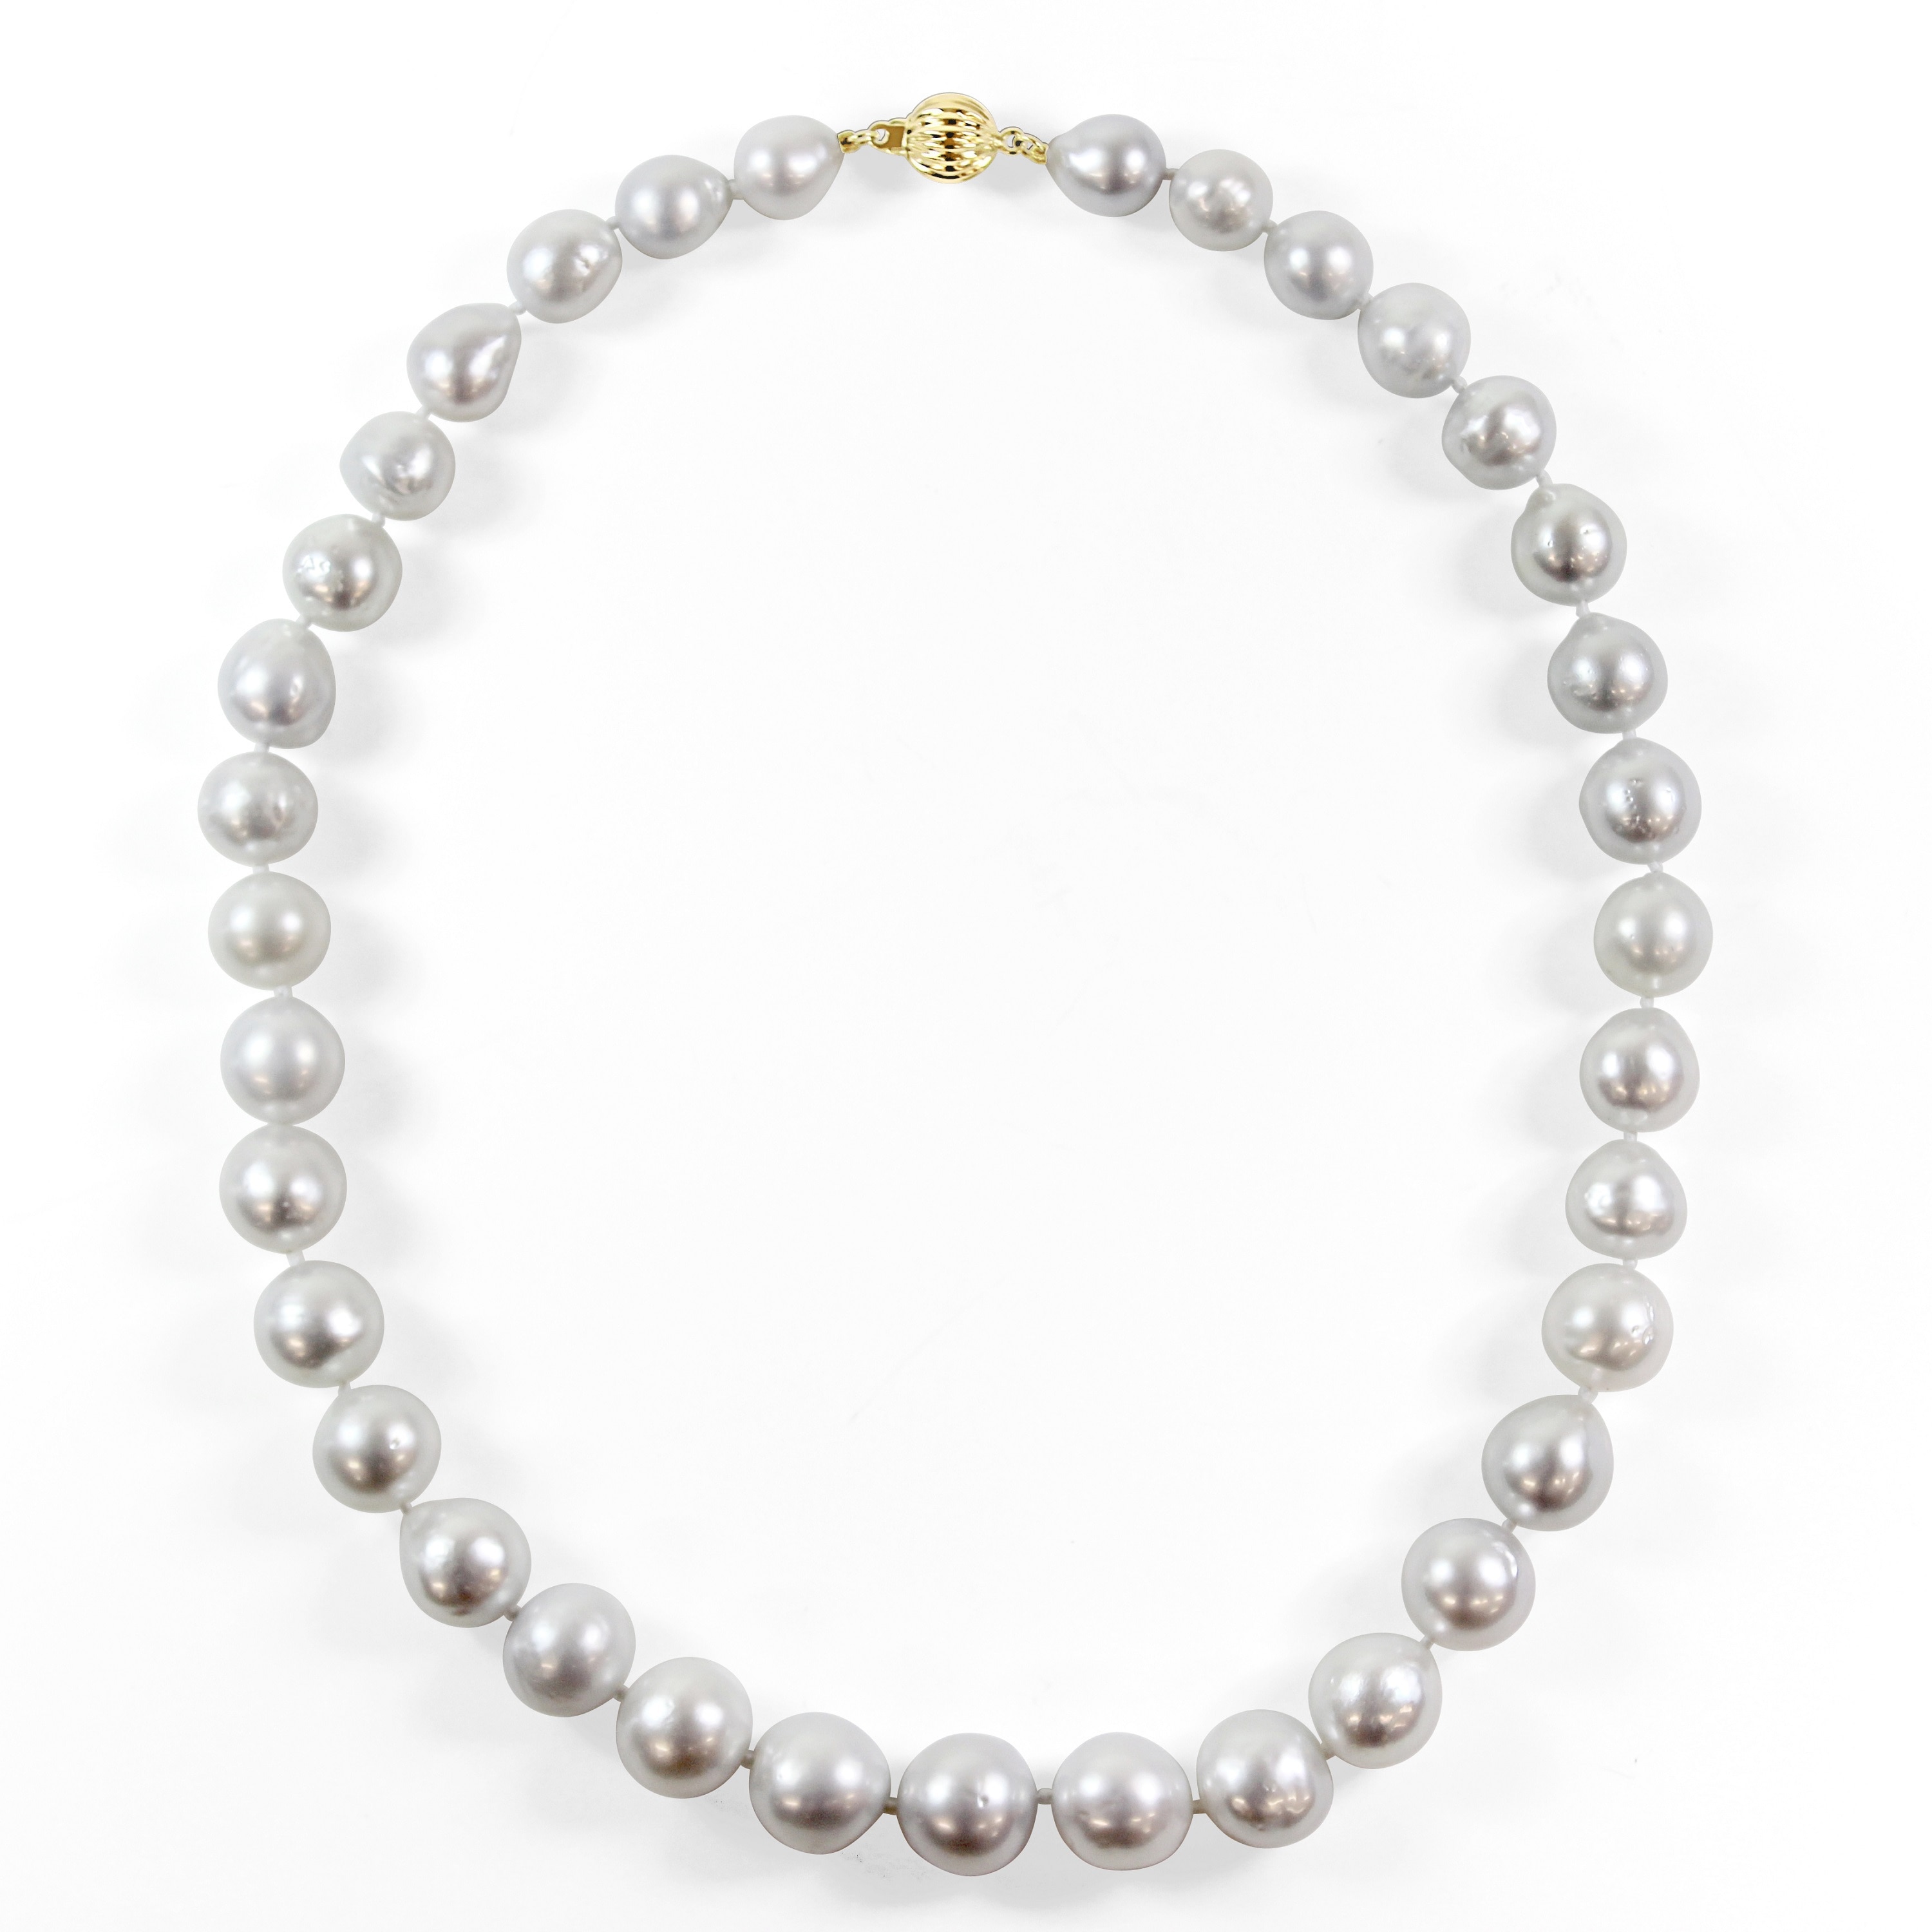 14K Yellow Gold 10-12.4mm Natural White Cultured Freshwater Pearl Necklace